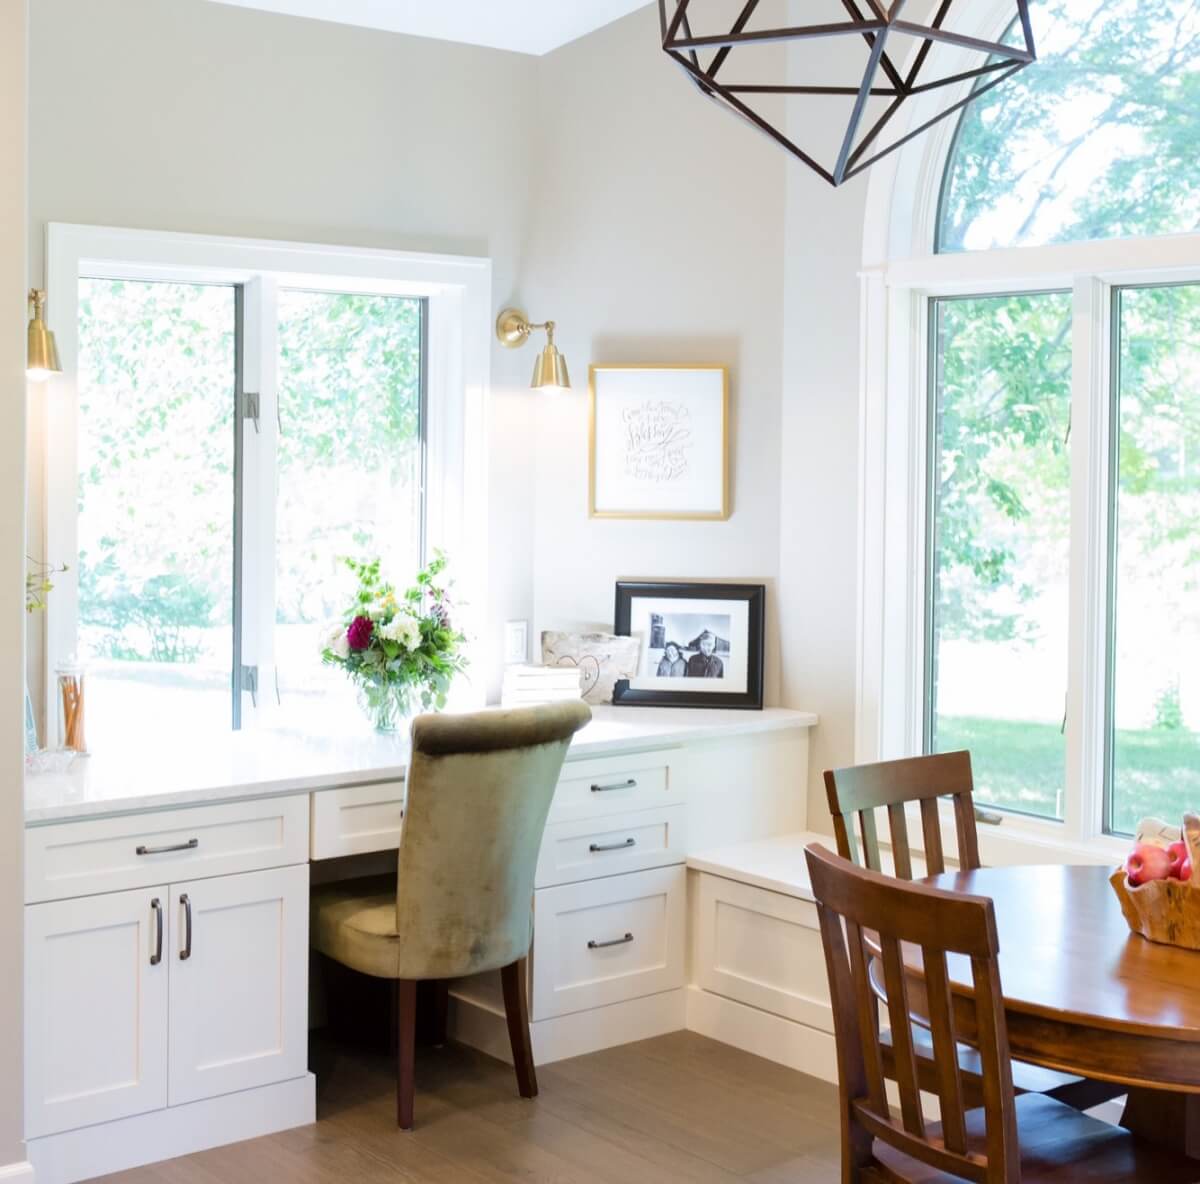 A stunning home office in the diining room with white cabinets and home office desk.